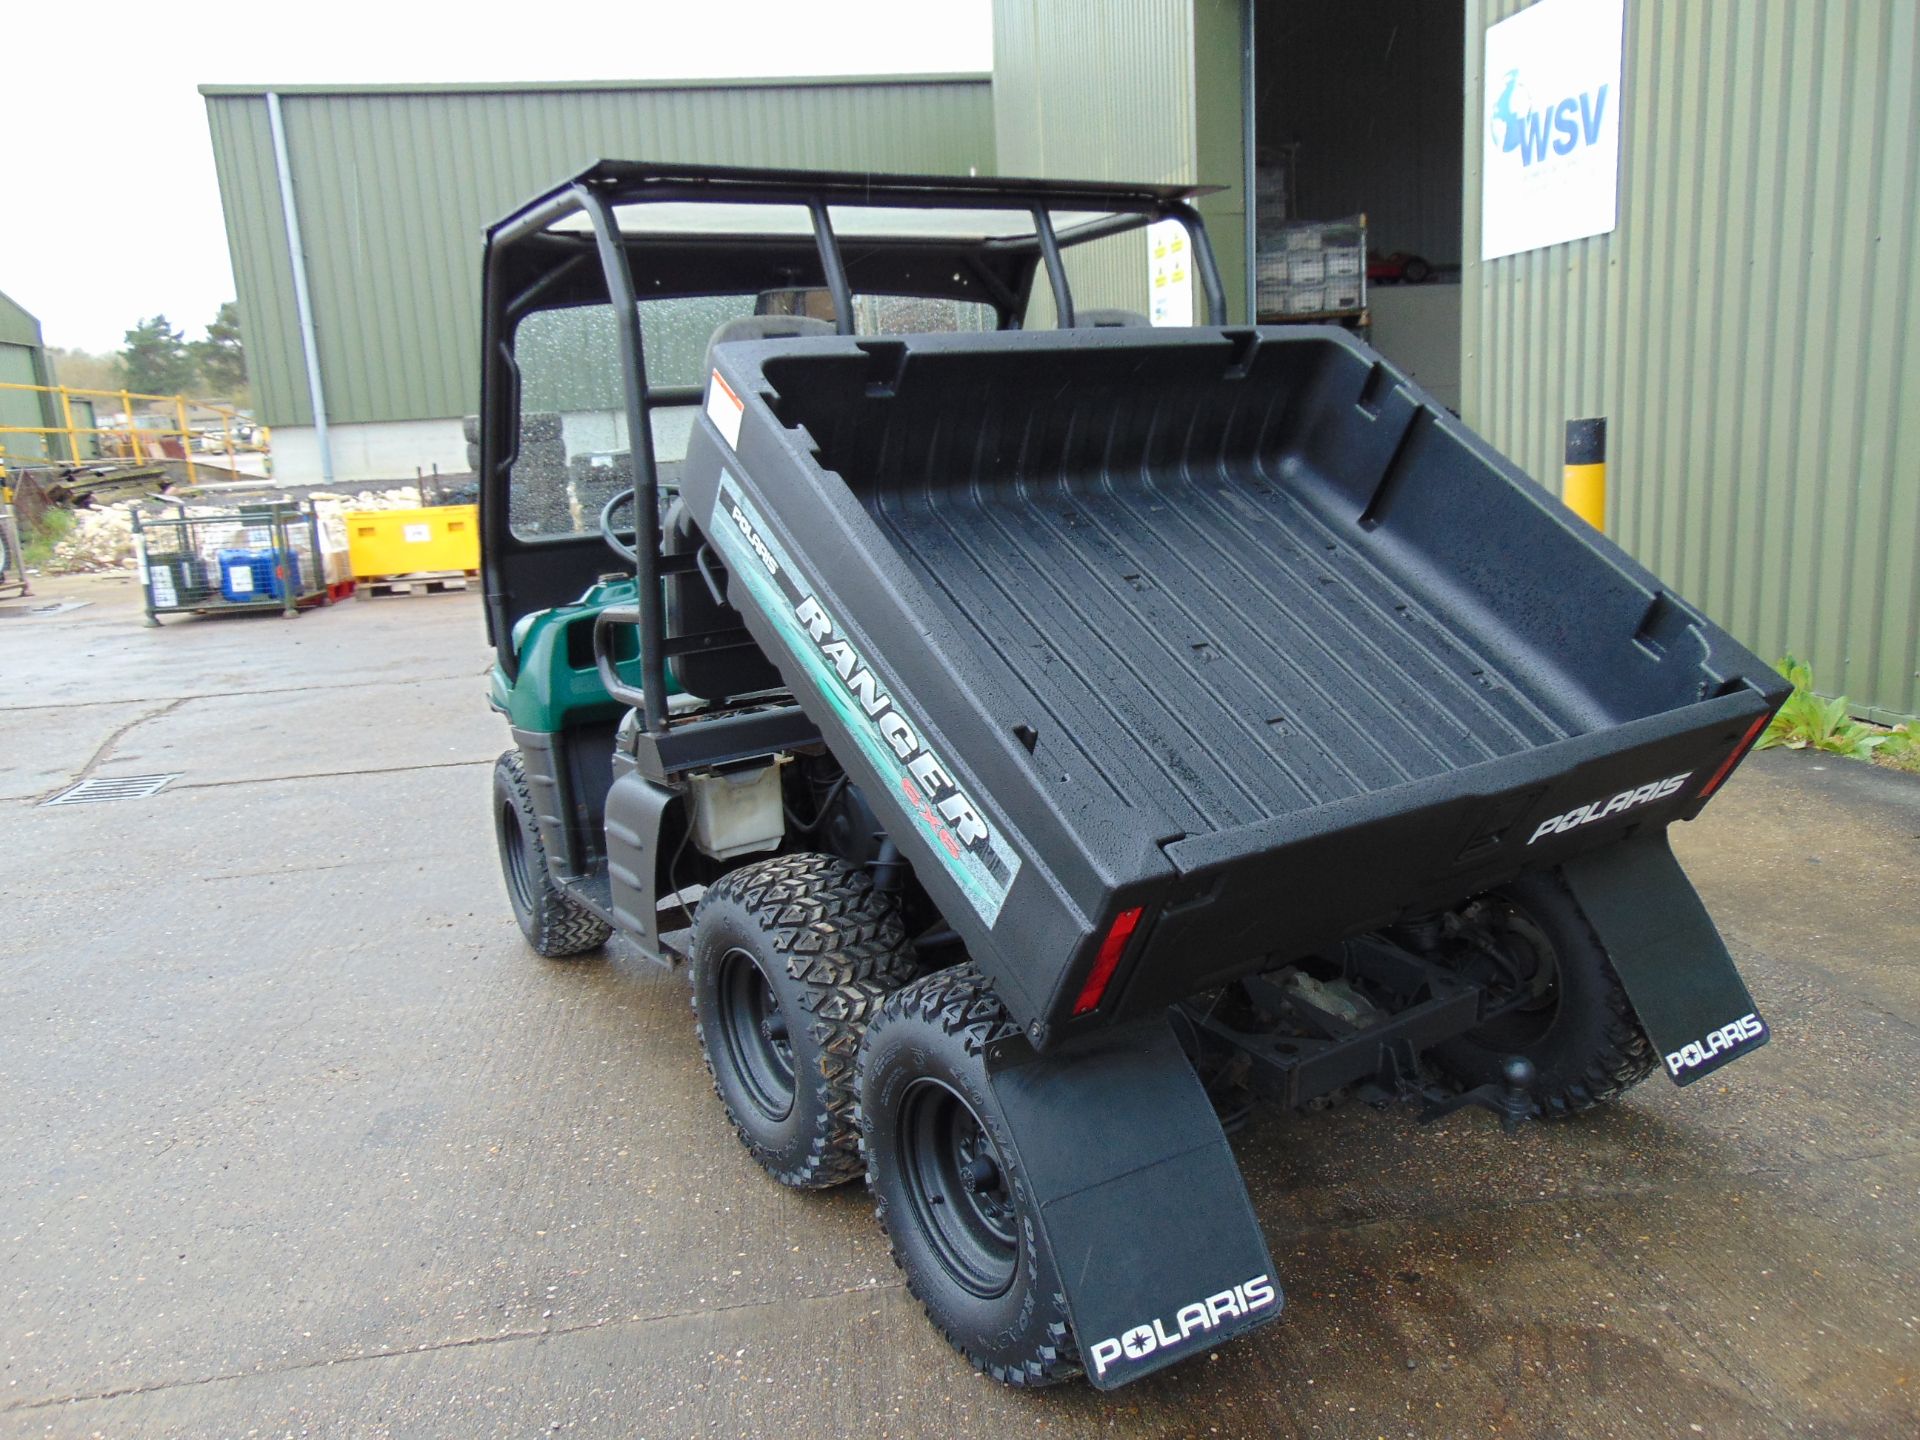 Polaris Ranger 6 x 6 Off-Road Utility Vehicle - Petrol Engine 555 hours Rec from Nat Grid - Image 24 of 30